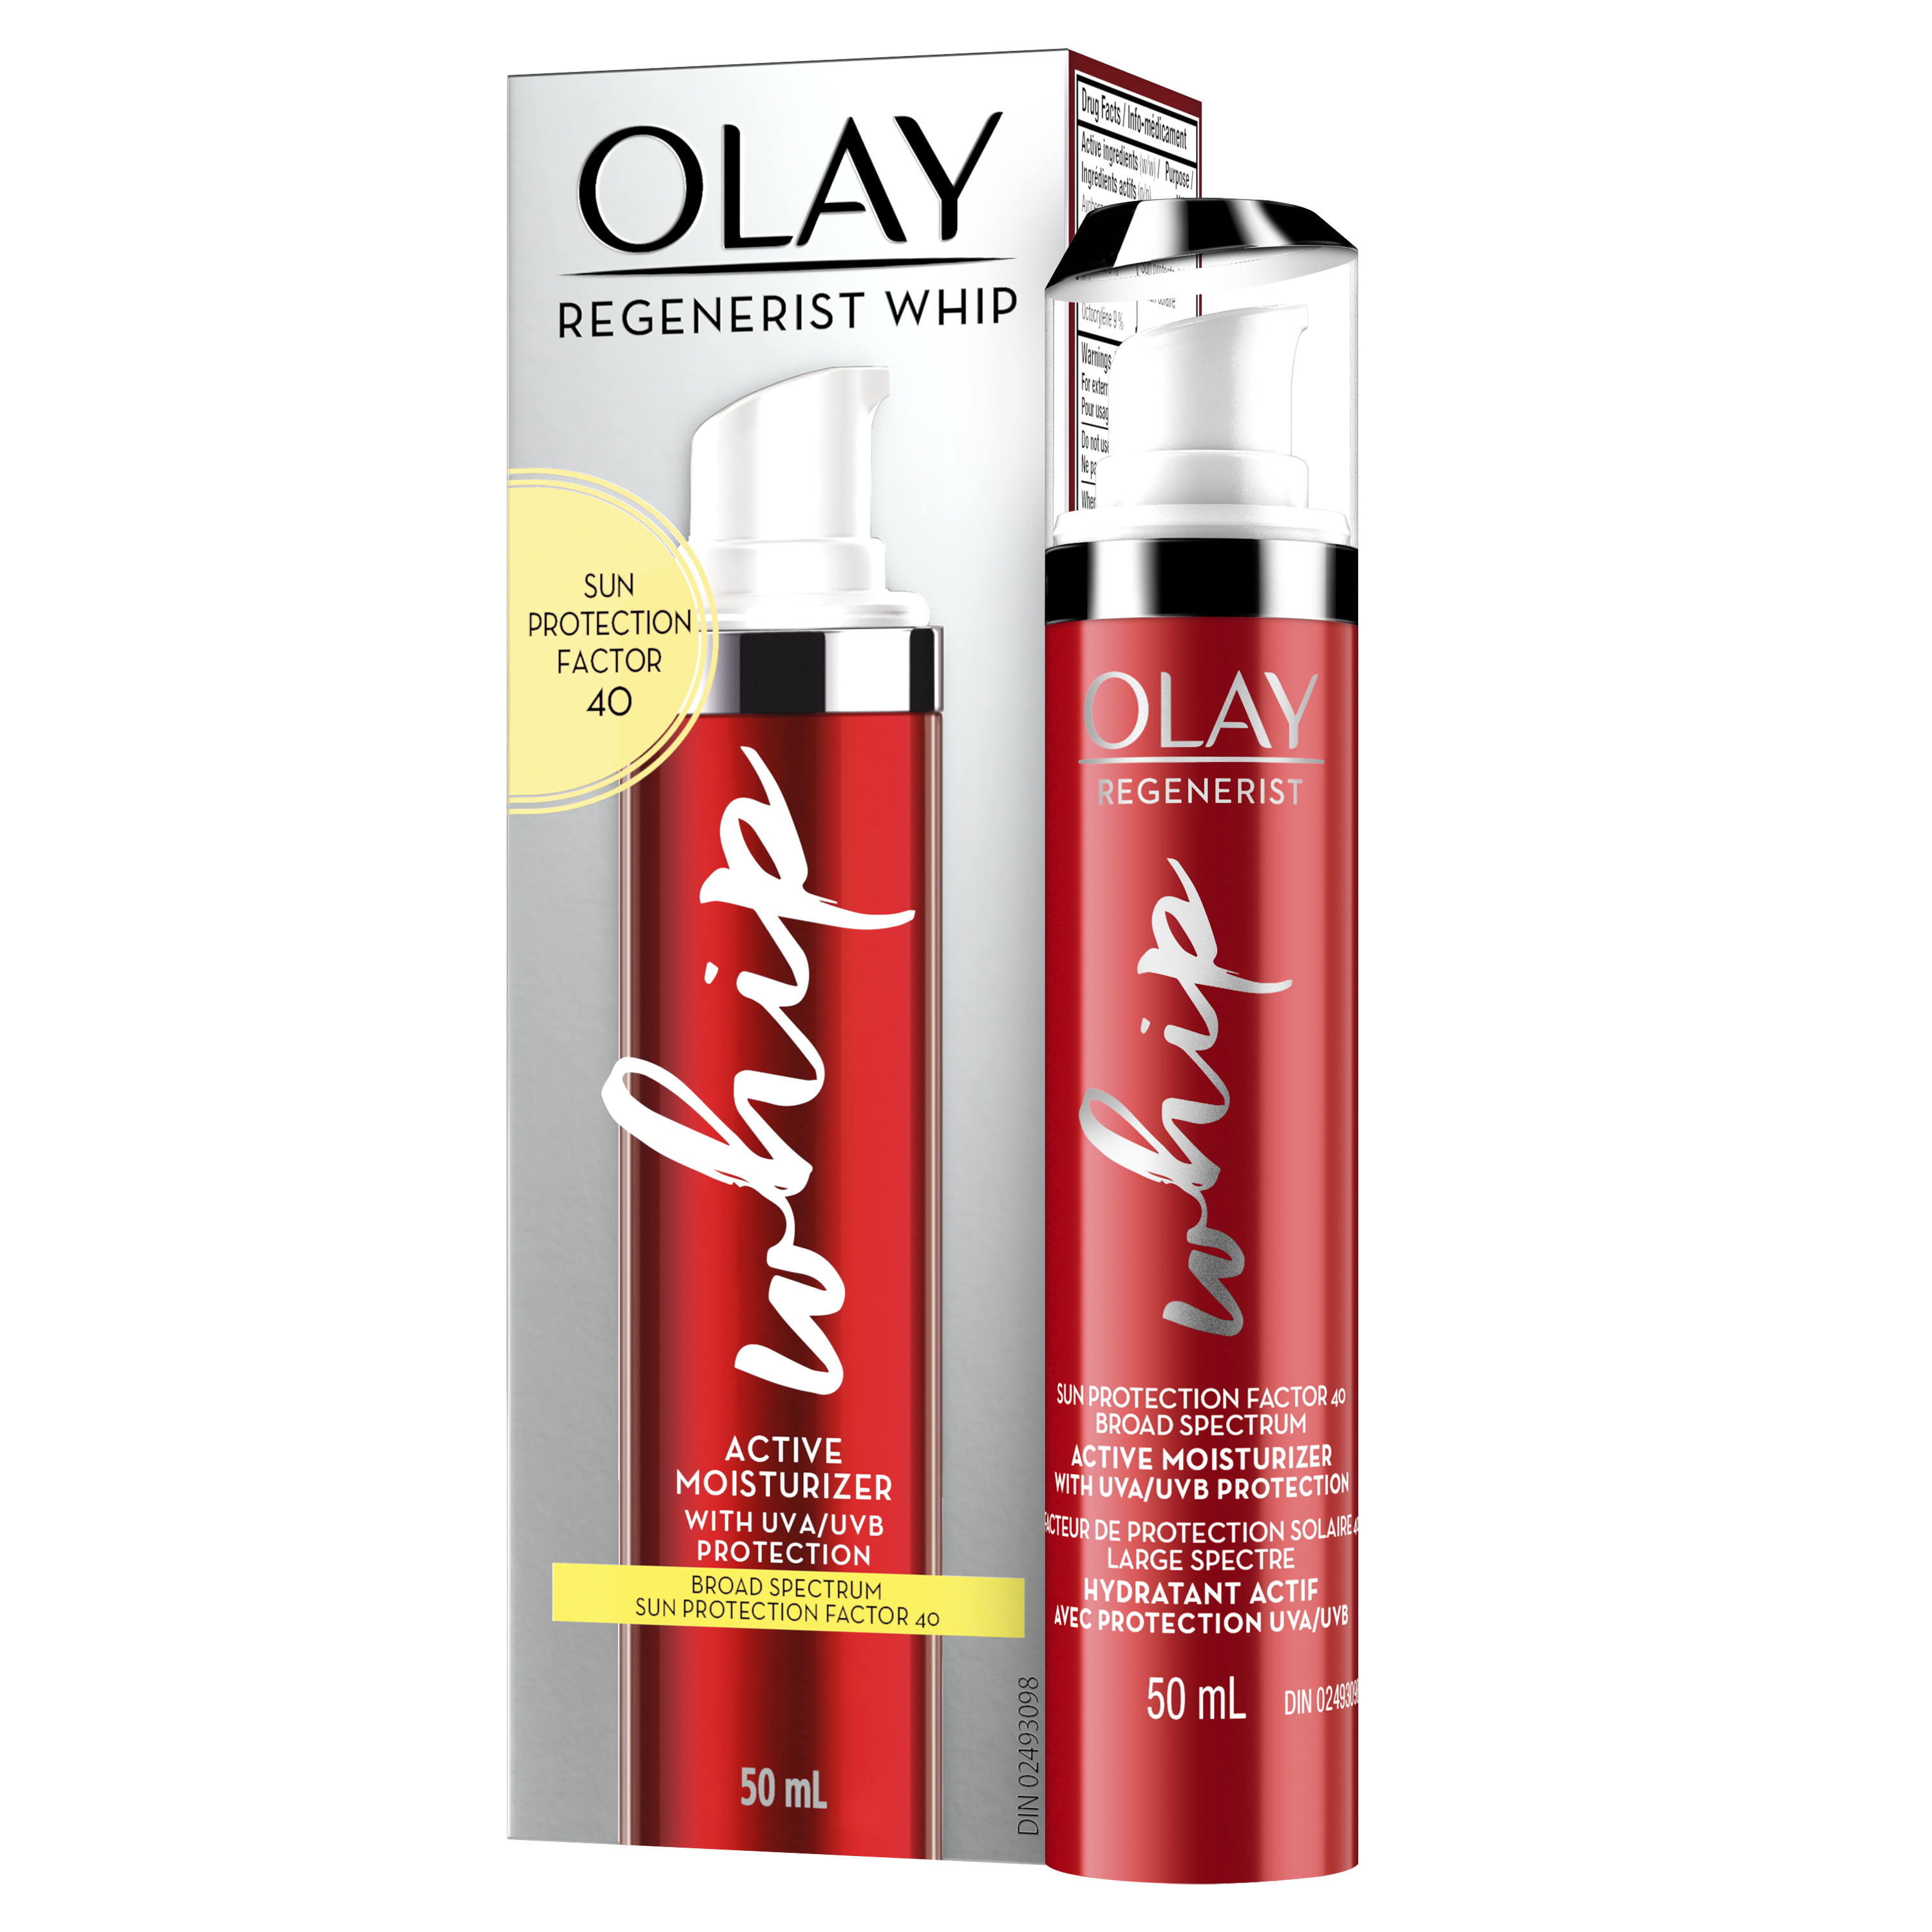 Hydratant actif Olay Regenerist Whip avec protection contre les rayons UVA/UVB, 50 mL_2